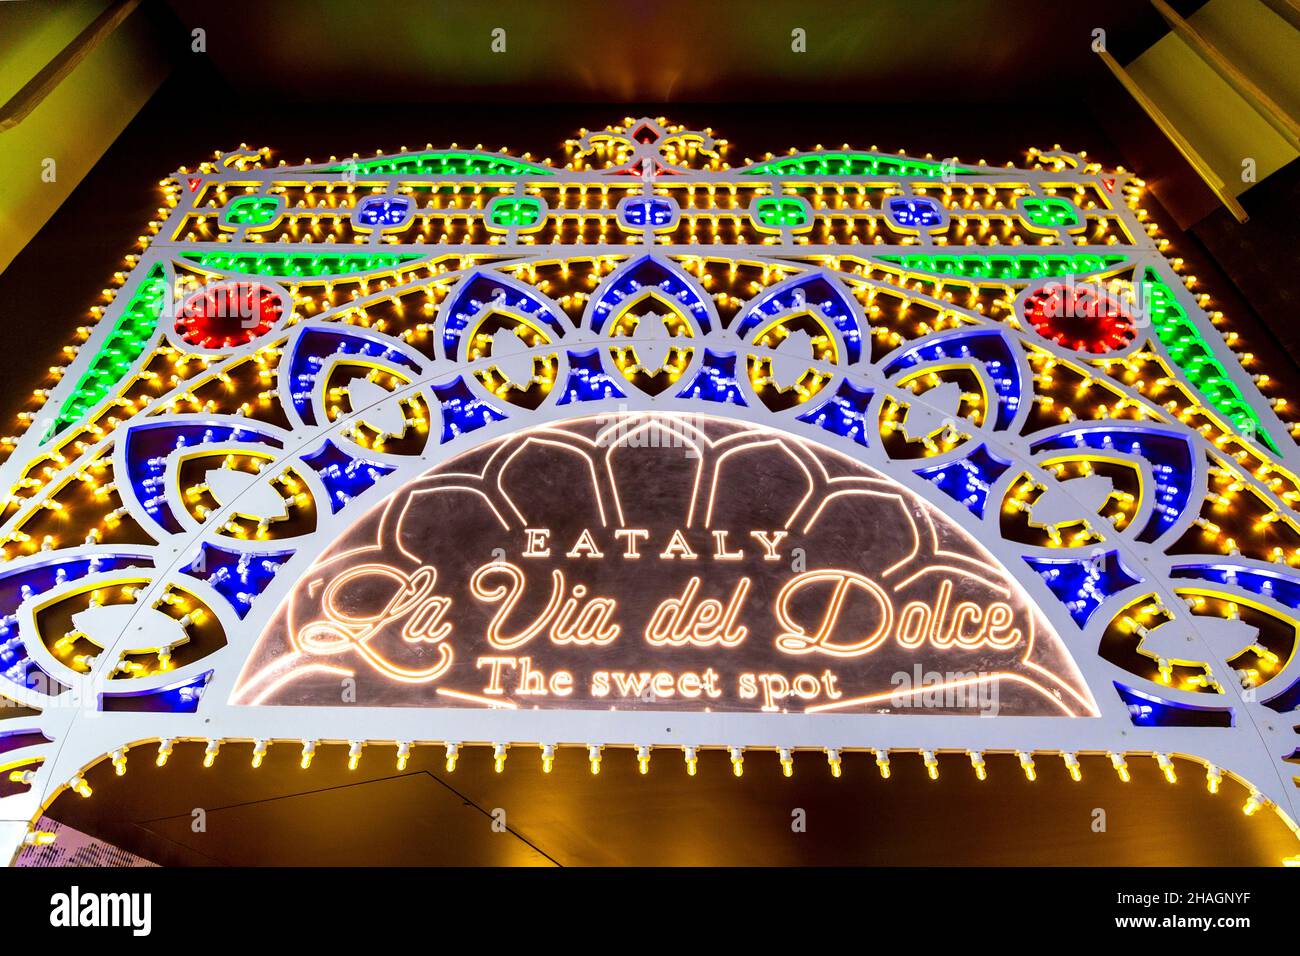 La Via del Dolce decorated with colourful lights at Eataly, London, UK Stock Photo